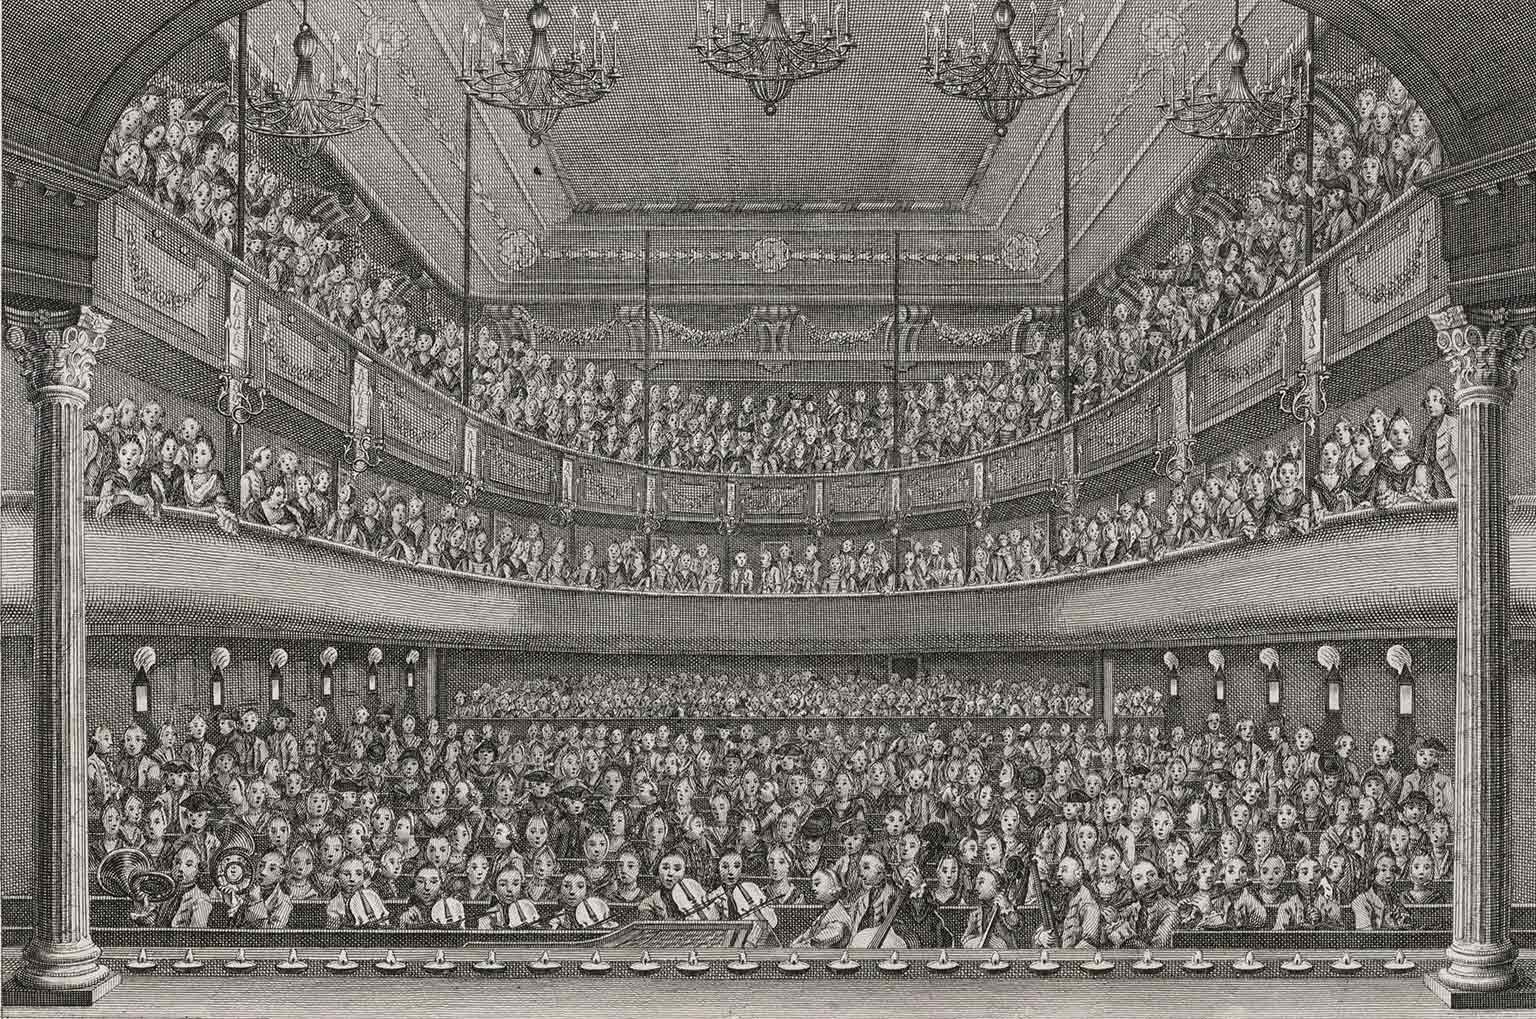 Keizersgracht theater, Amsterdam, before the fire in 1772, drawing by Willem Writs